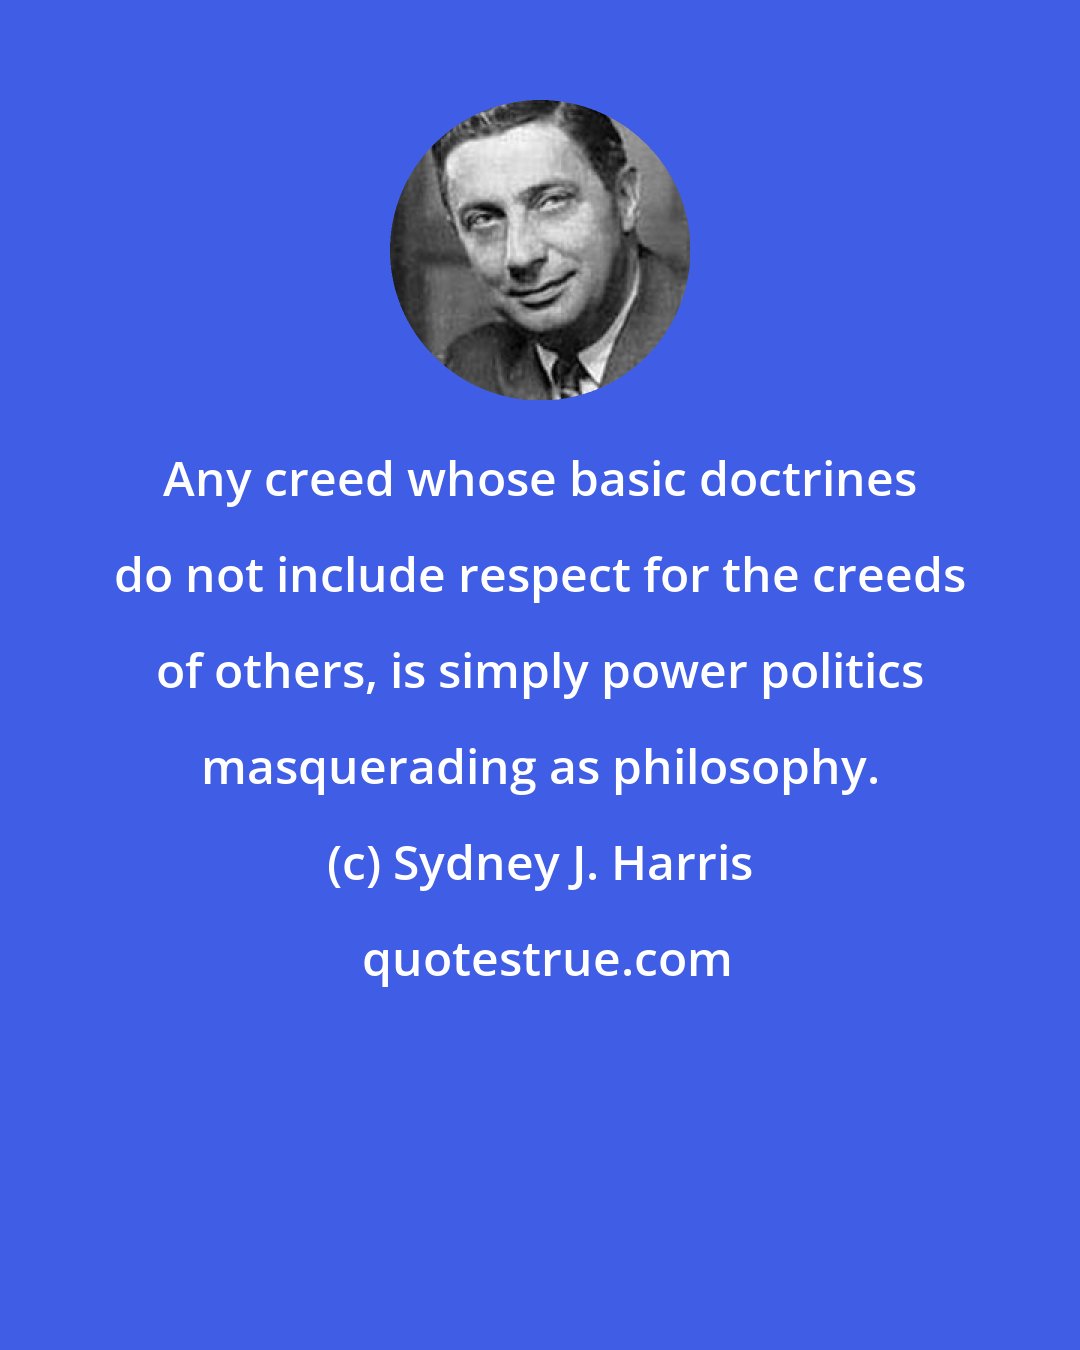 Sydney J. Harris: Any creed whose basic doctrines do not include respect for the creeds of others, is simply power politics masquerading as philosophy.